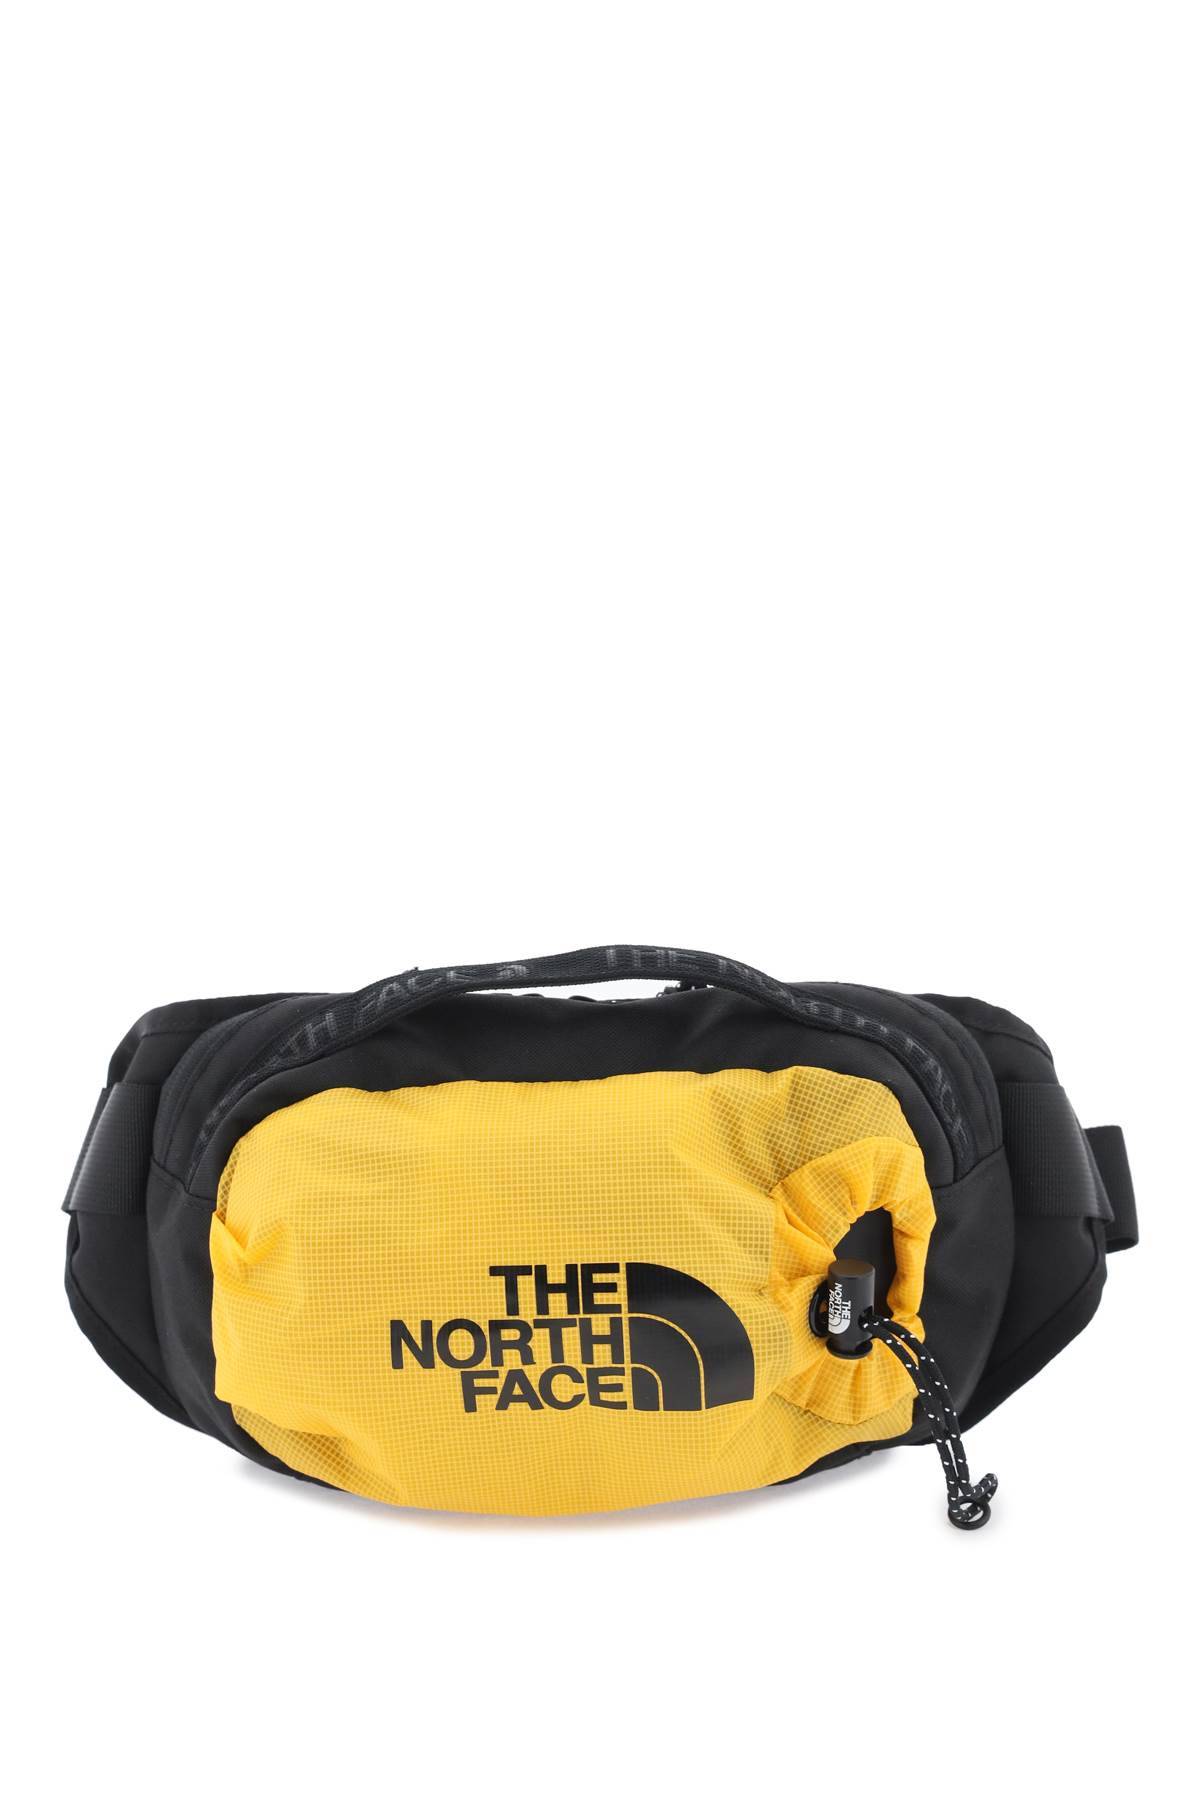 The North Face Bozer Iii - L Beltpack In Black,yellow